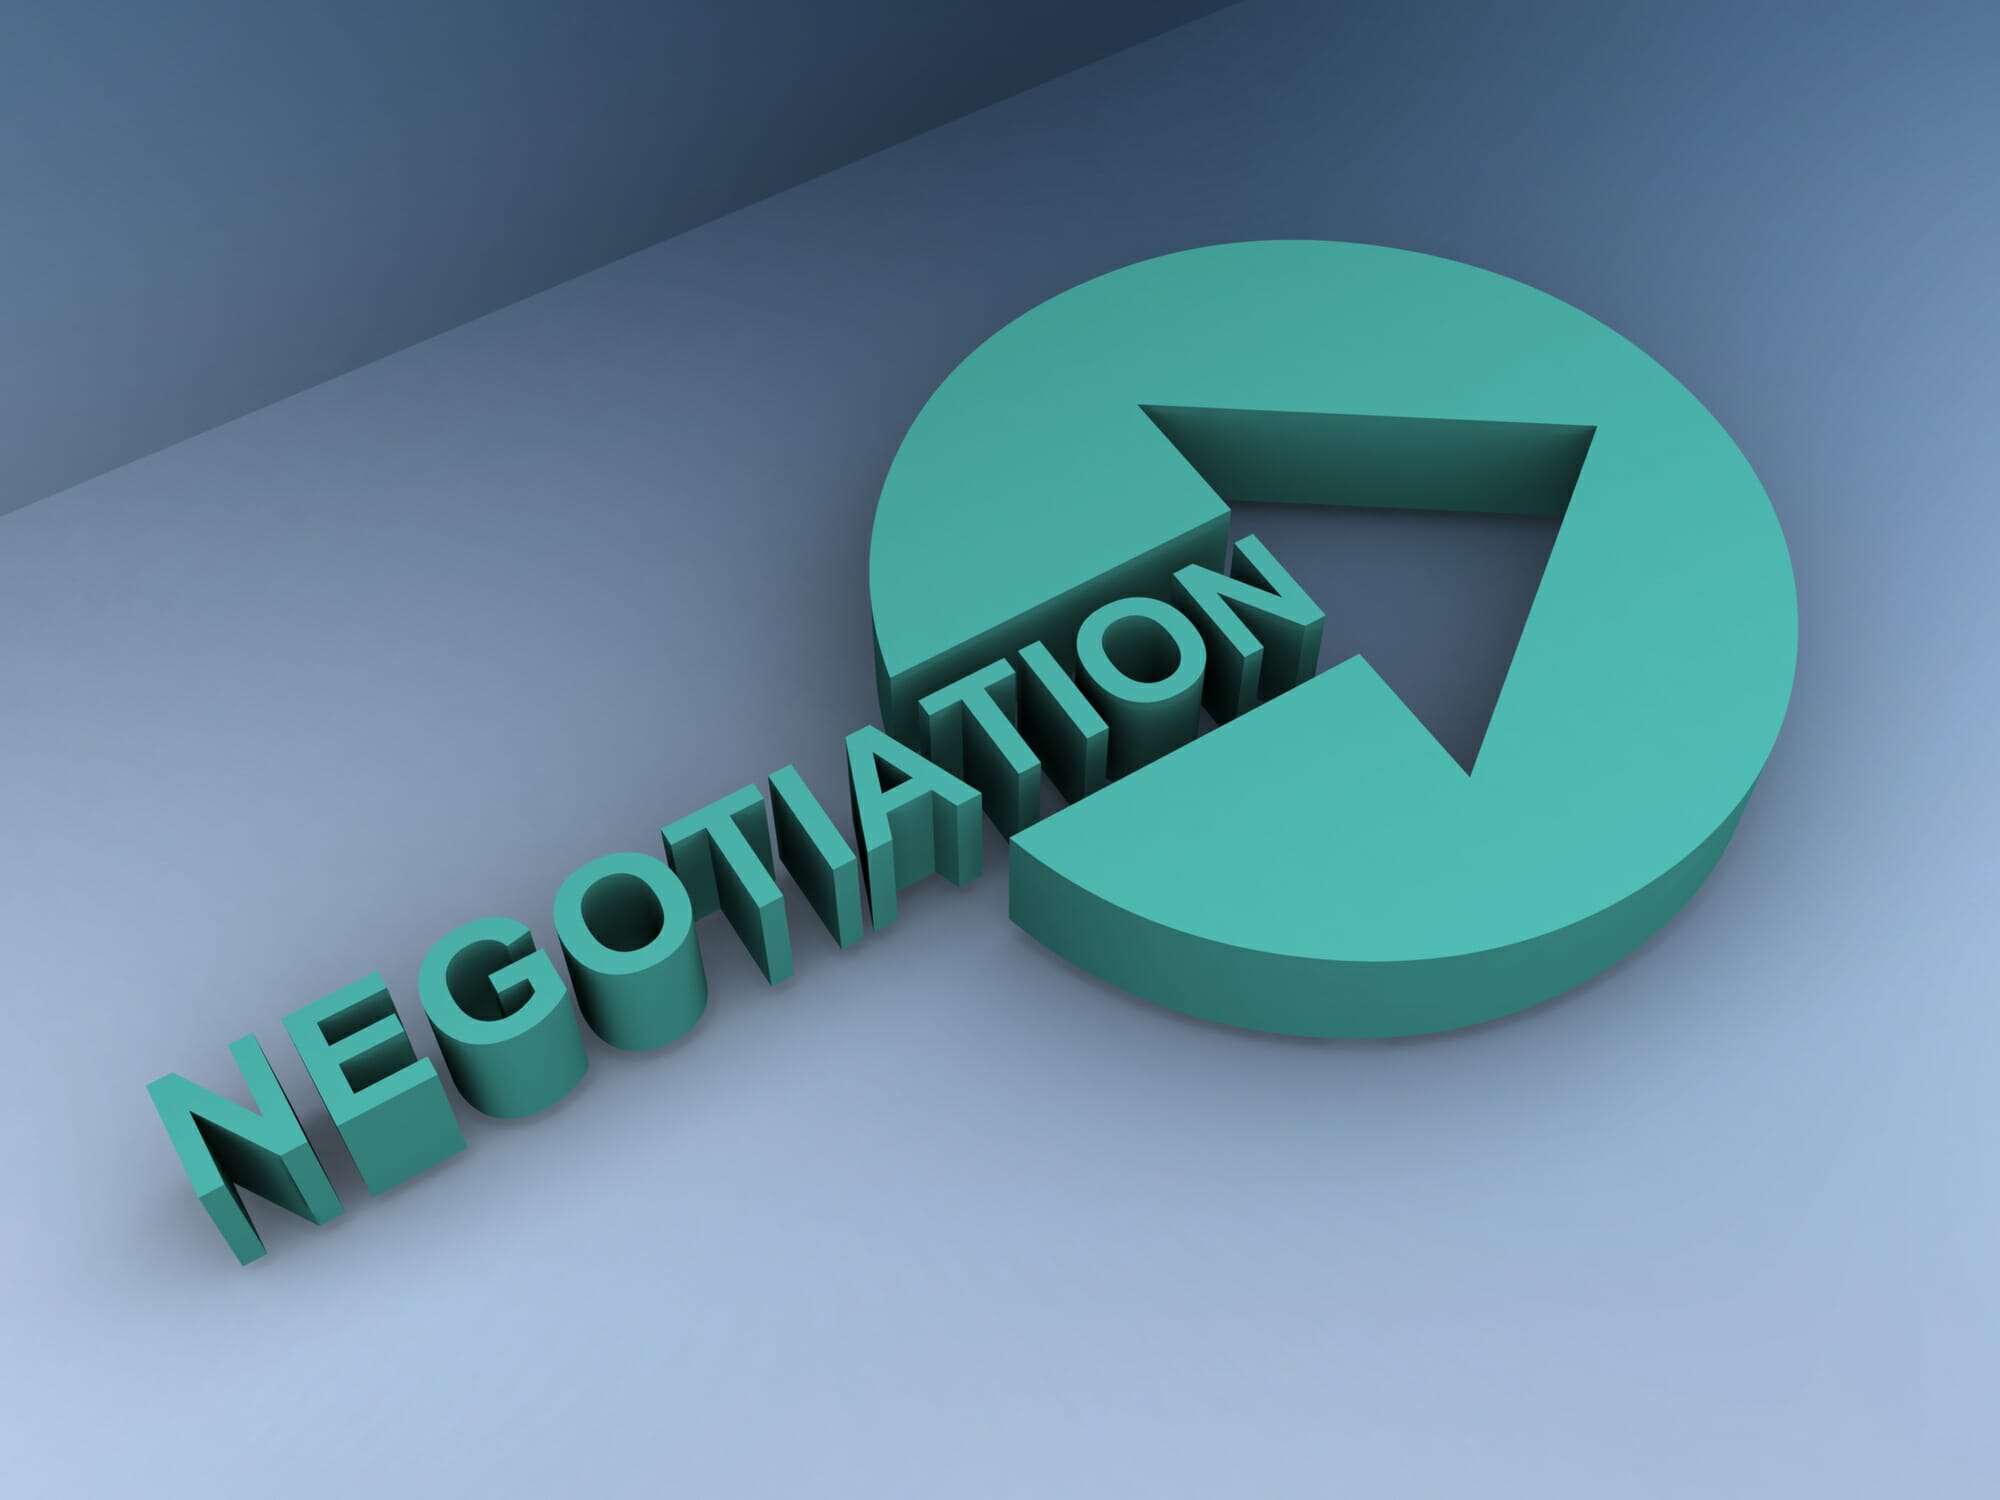 3D turquoise word "Negotiation" ending in an arrow